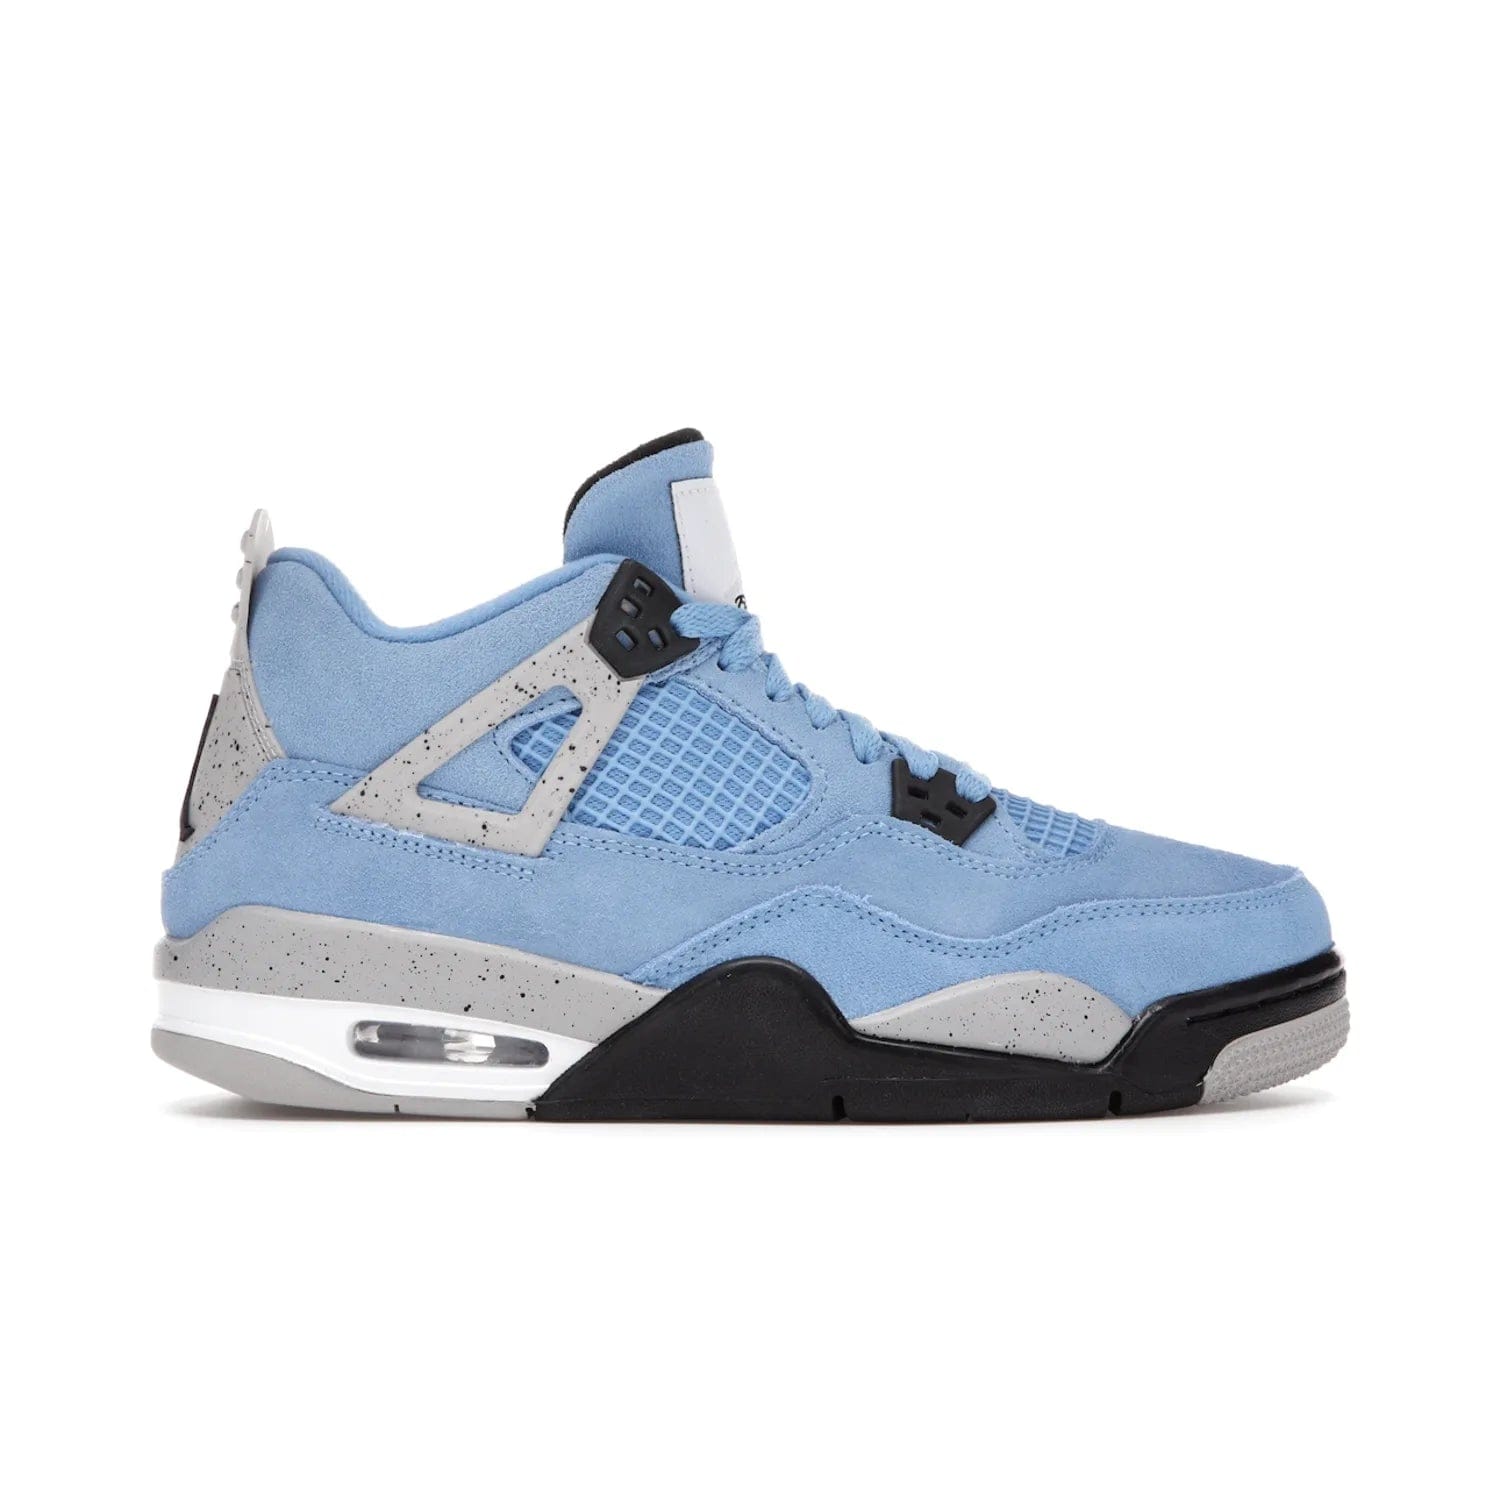 Jordan 4 Retro University Blue (GS) - Image 1 - Only at www.BallersClubKickz.com - Air Jordan 4 Retro University Blue GS: Classic silhouette and vibrant colors. Featuring a suede upper and Jumpman icon, this grade school-size shoe is perfect for collections and retails at $150.